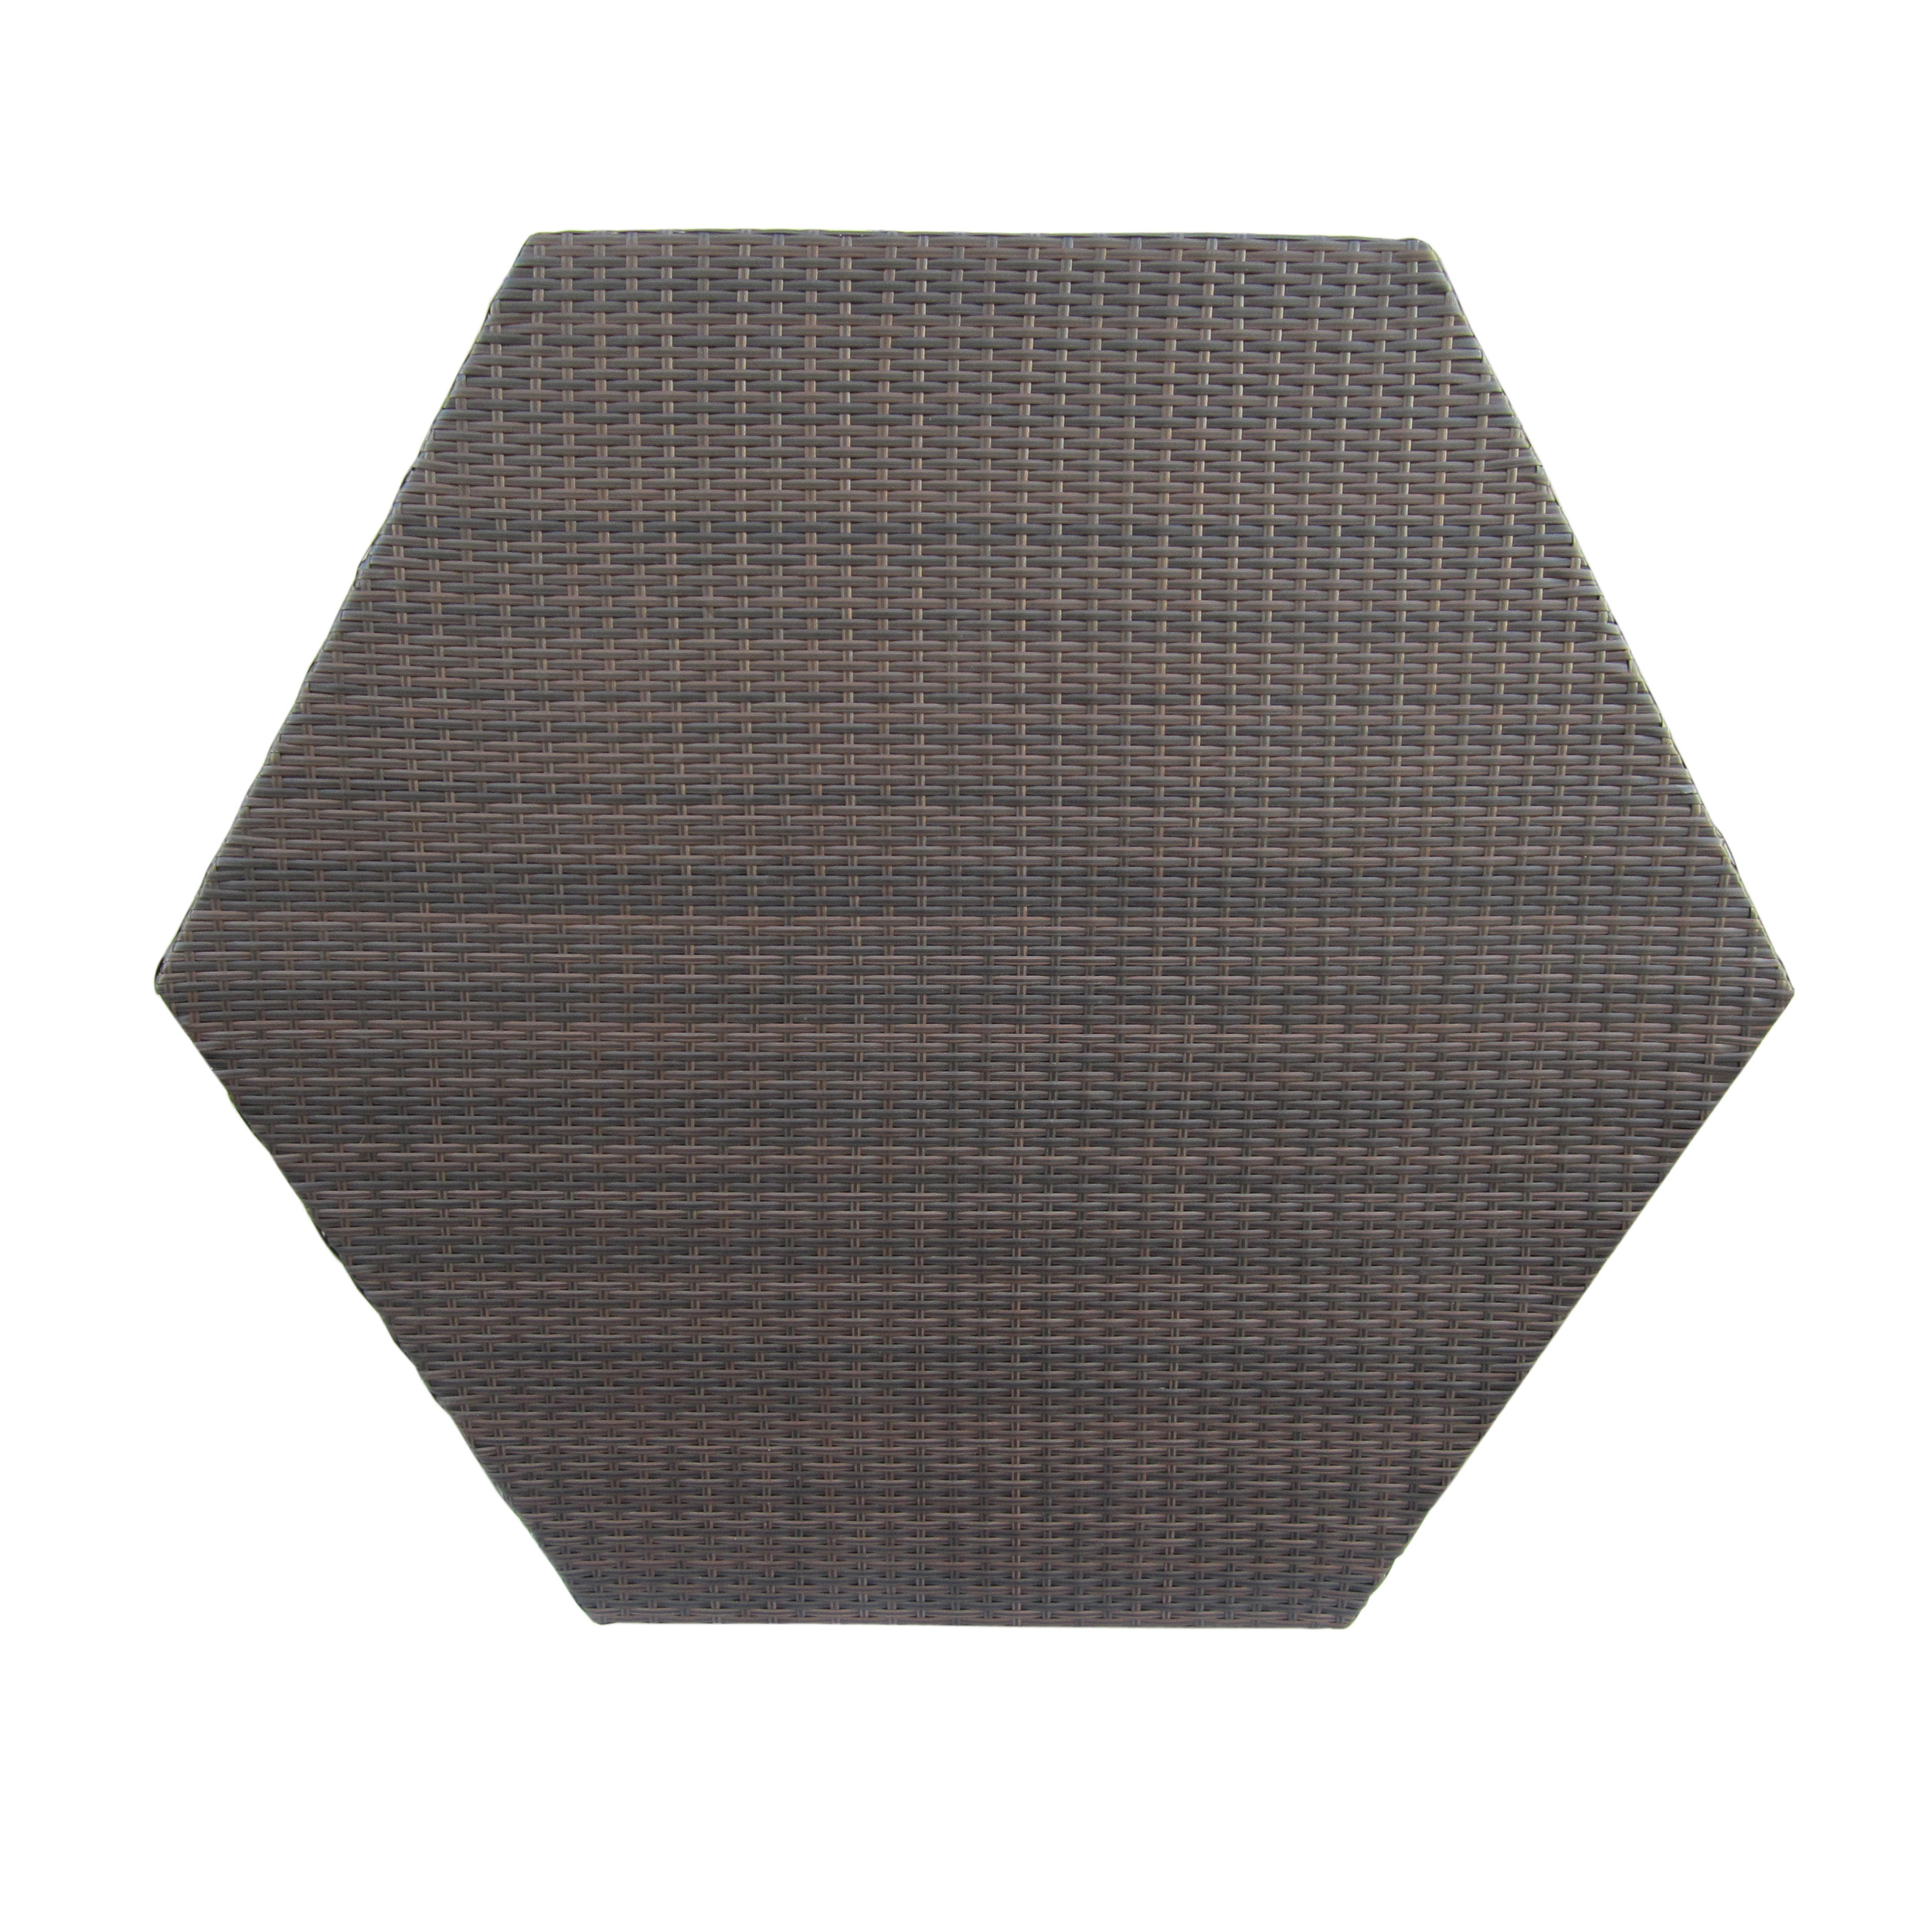 Outdoor 53-Inch Wicker Hexagon Dining Table, Multi Brown - image 7 of 9